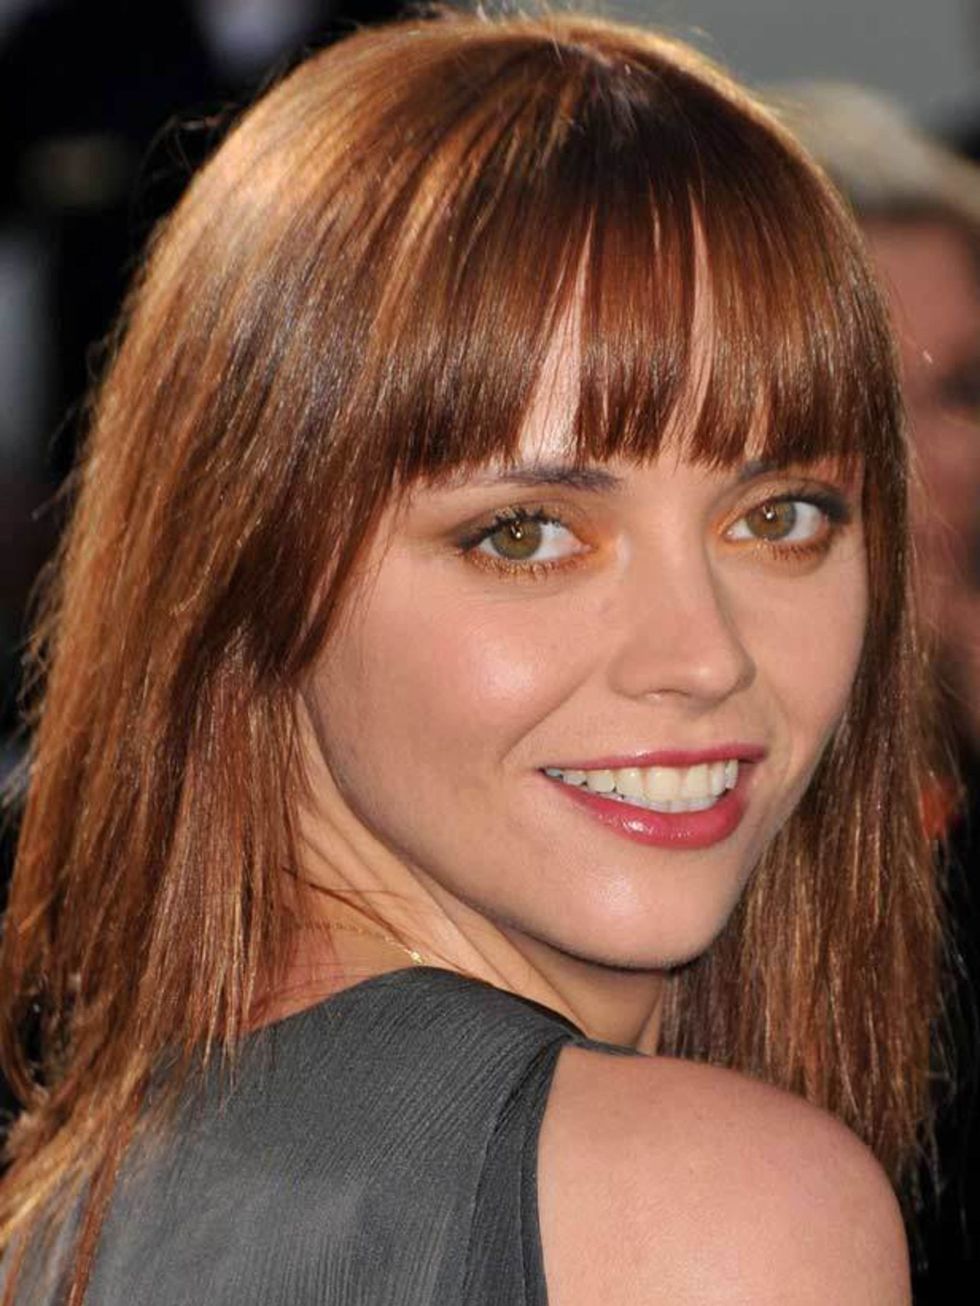 <p><a href="http://www.elleuk.com/beauty/celeb-beauty/celeb-make-up/%28section%29/everyone-s-wearing-false-lashes">Click here to see more Christina Ricci </a></p>